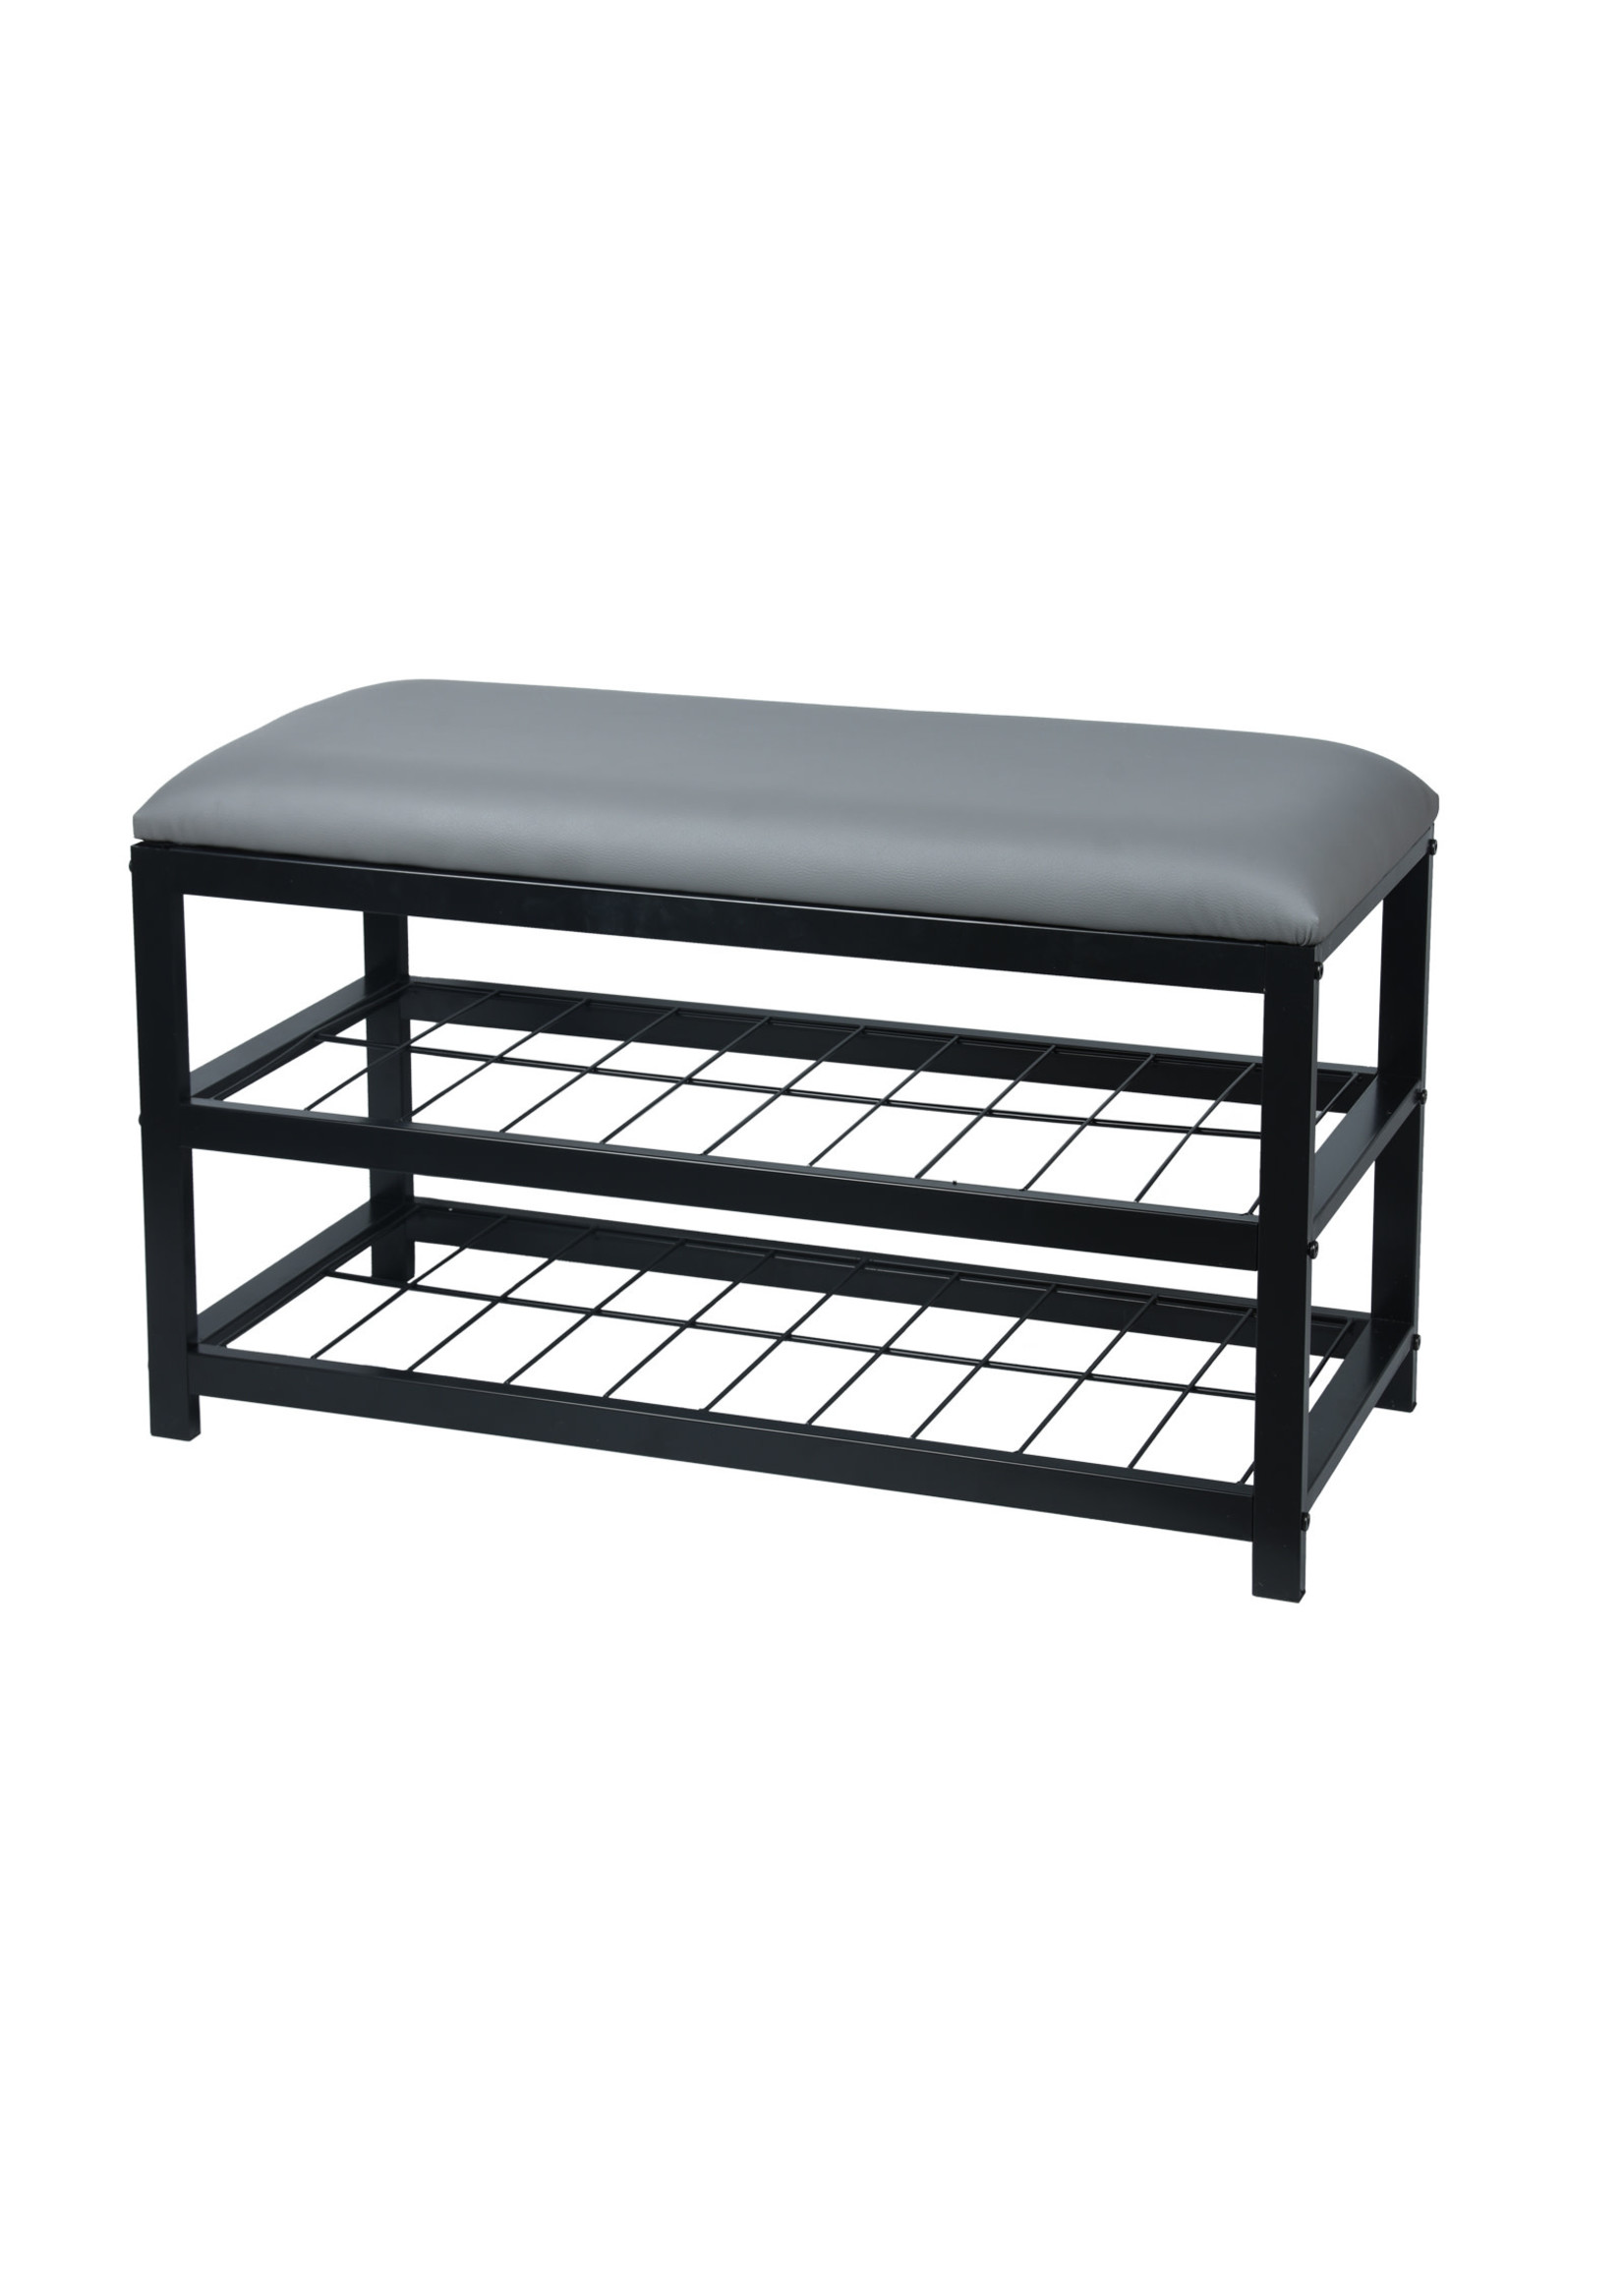 ITY INTERNATIONAL Metal Bench Faux Leather Grey with Storage